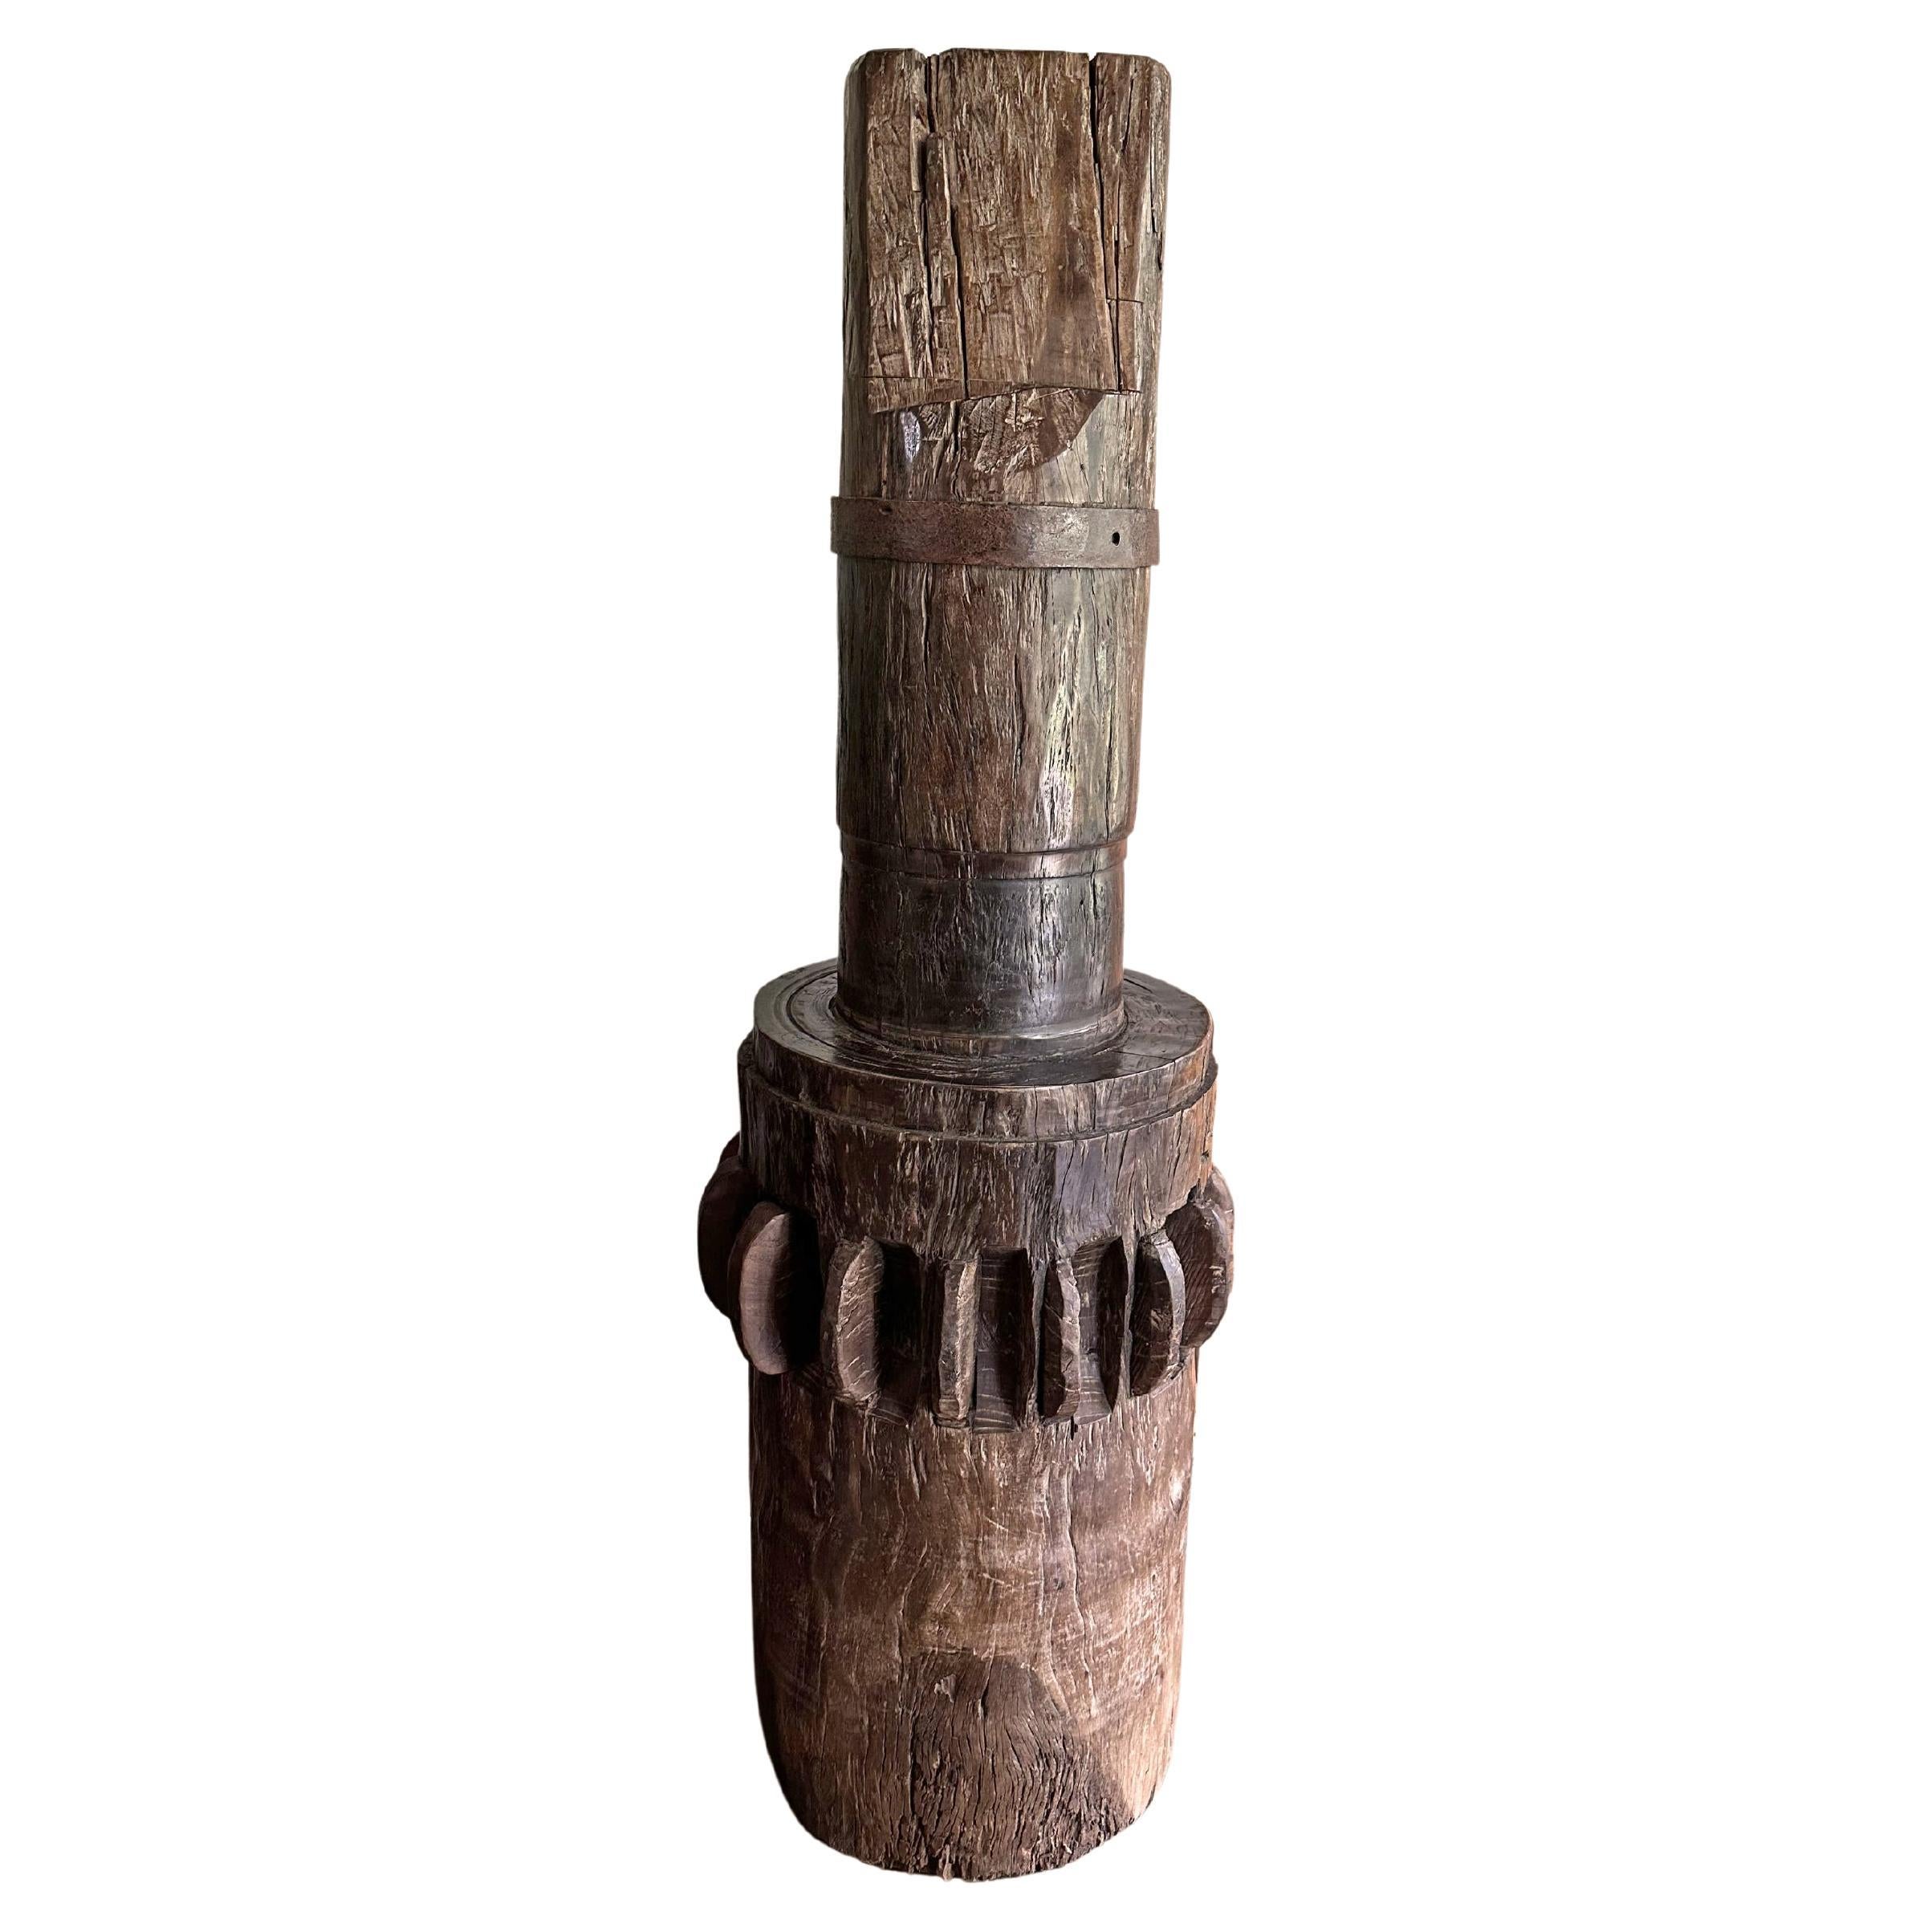 Solid Teak Sugar Cane Mill Crusher / Grinder from Java, Indonesia, c. 1900 For Sale